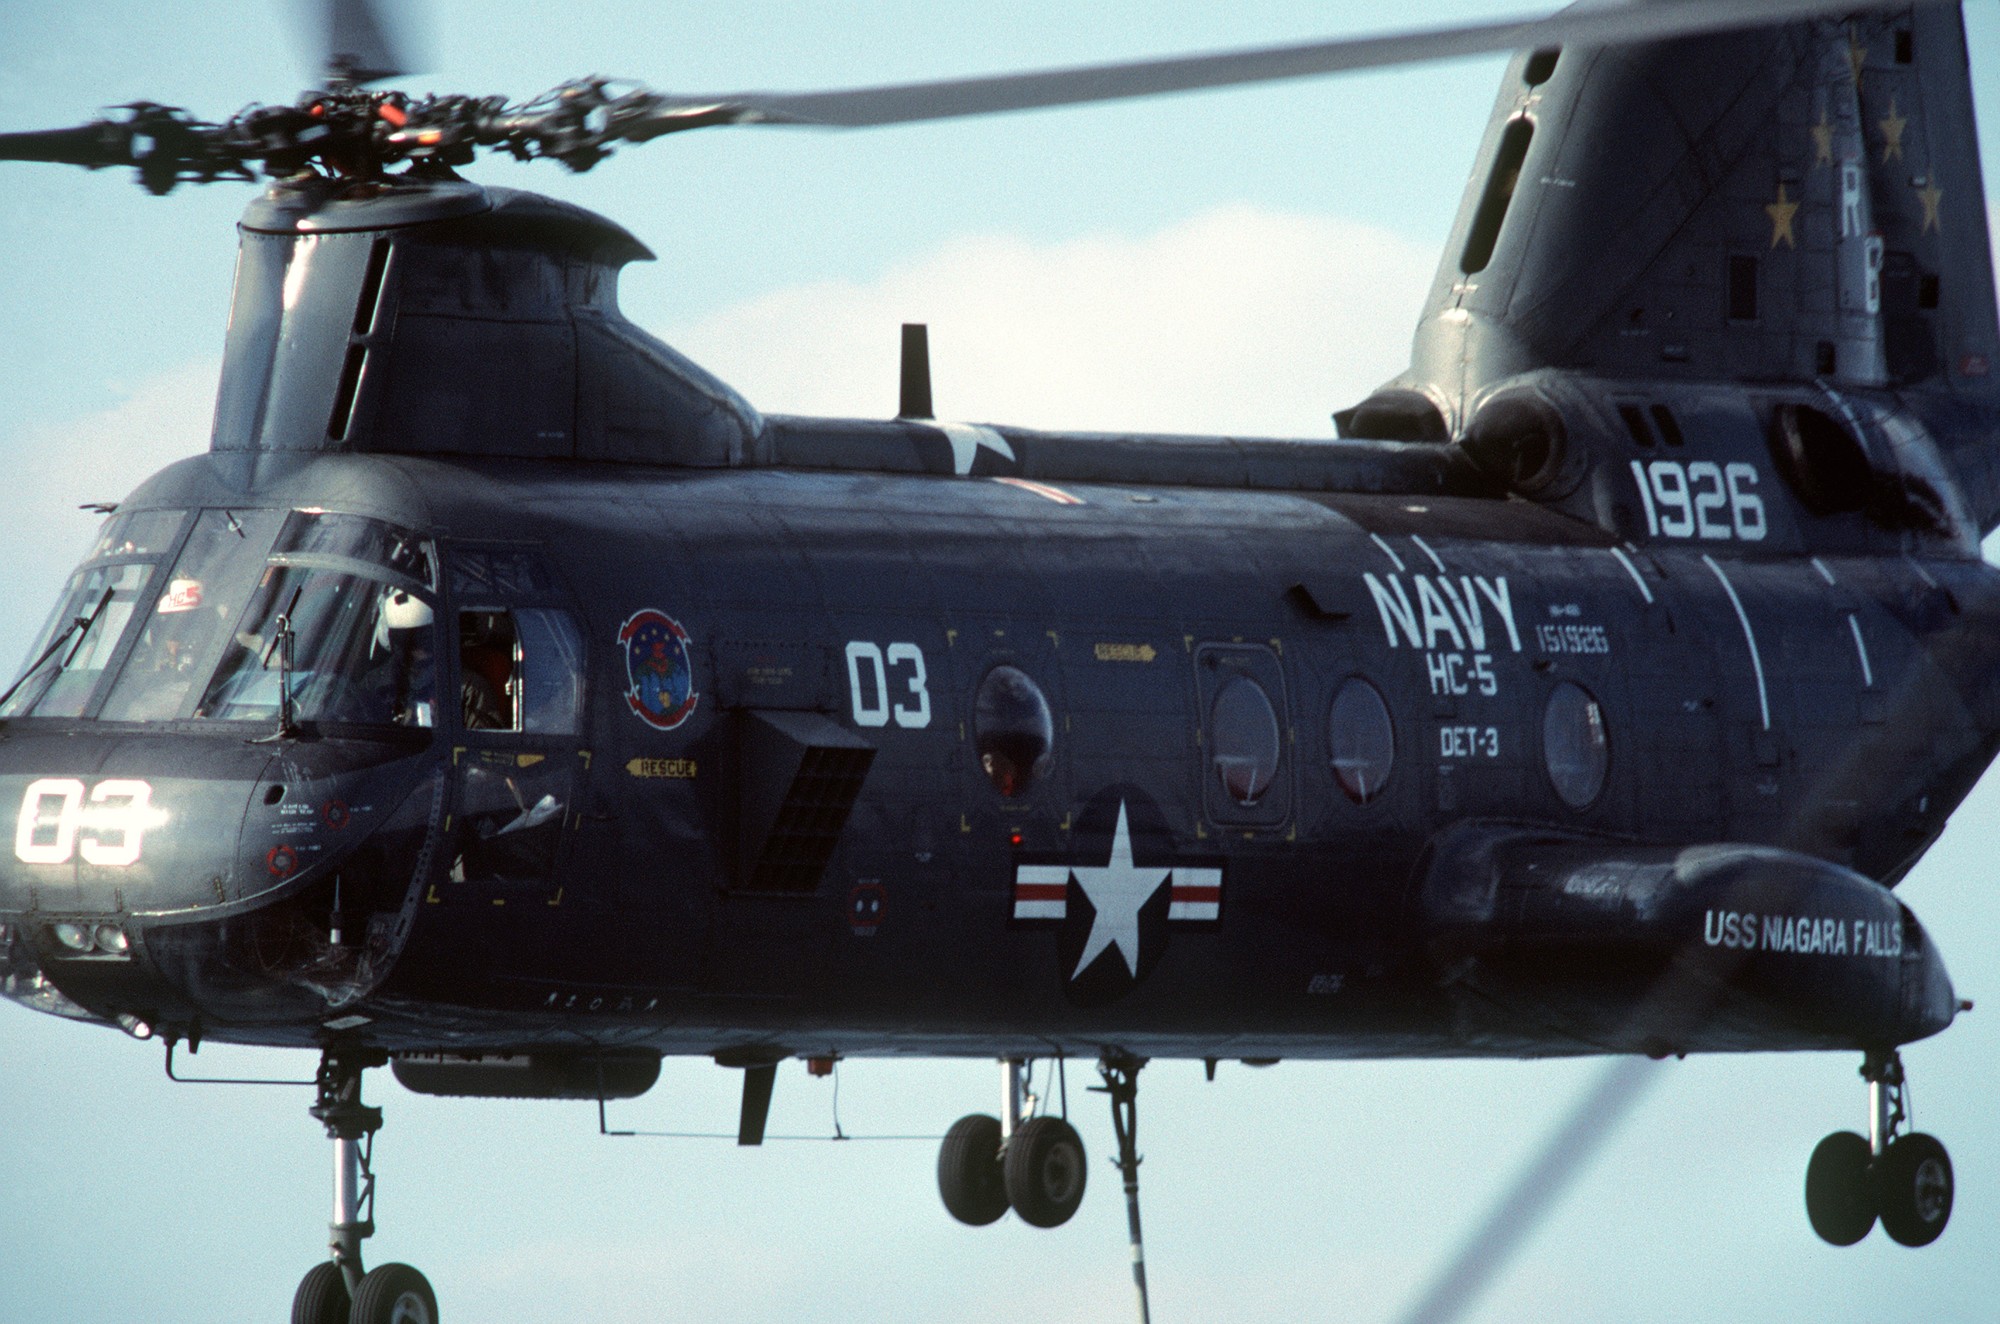 hc-5 providers helicopter combat support squadron navy hh-46 sea knight 49